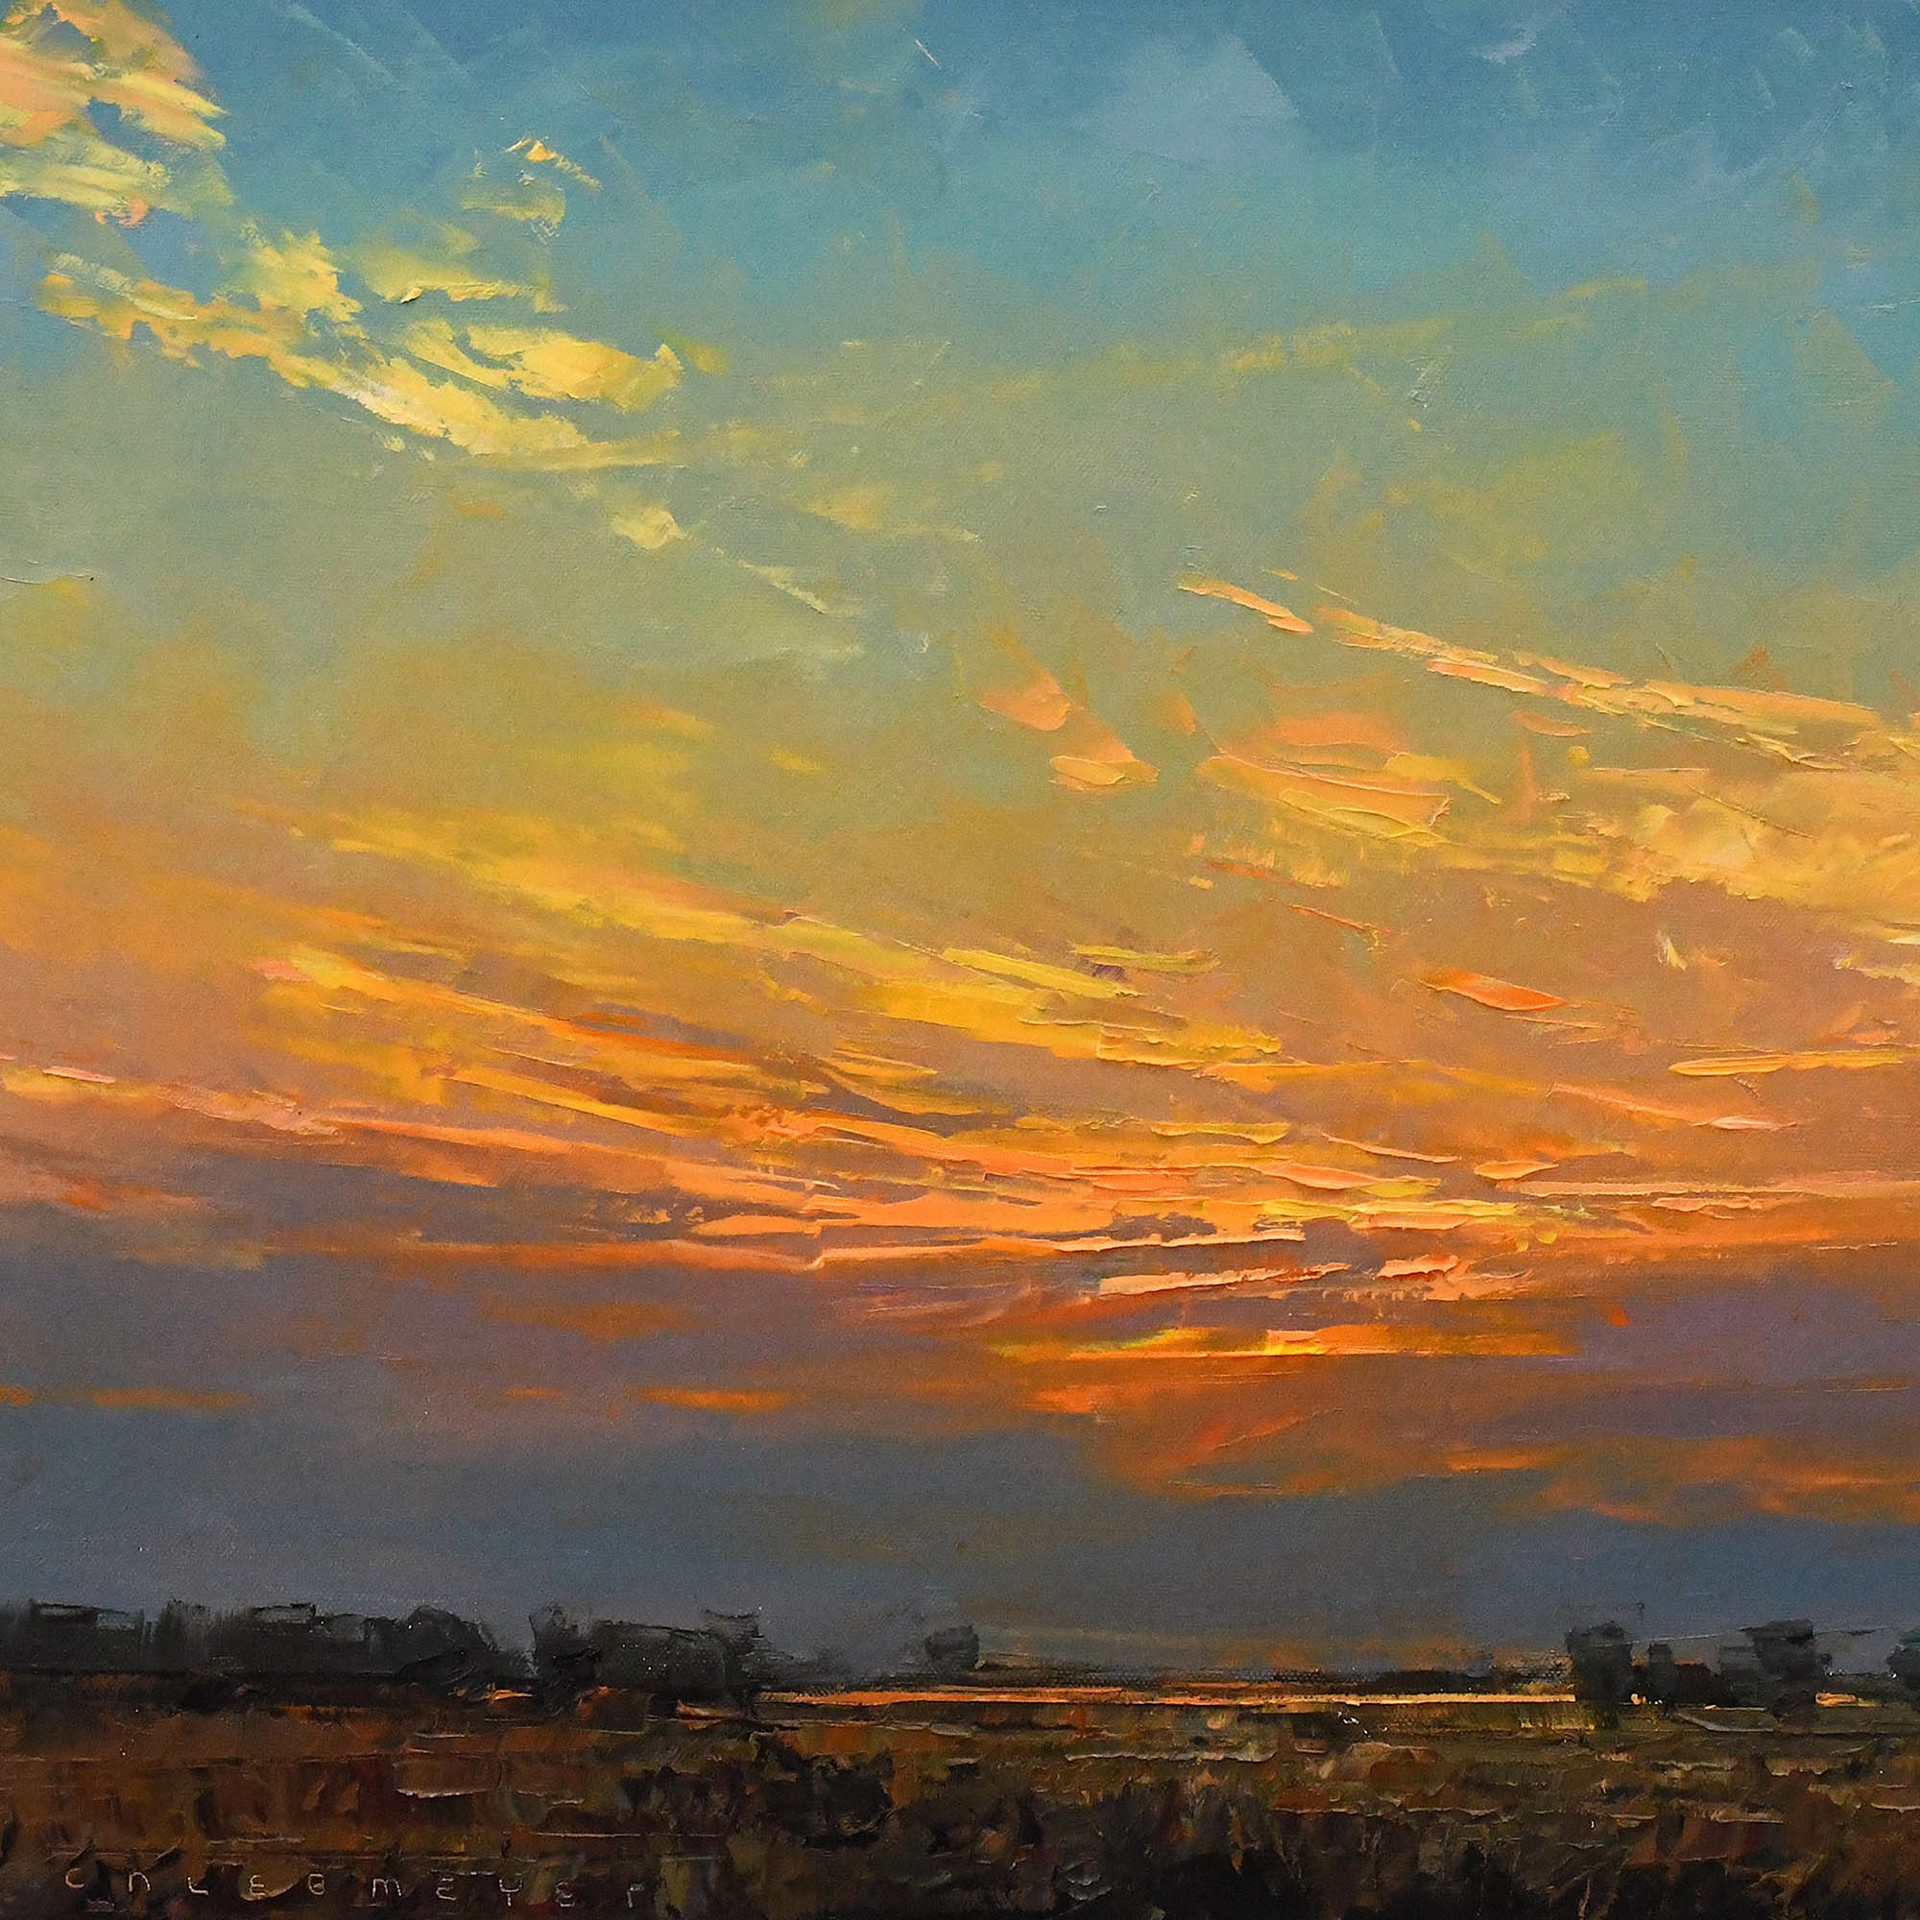 Original Oil Painting By Caleb Meyer Featuring A Landscape At Sunset